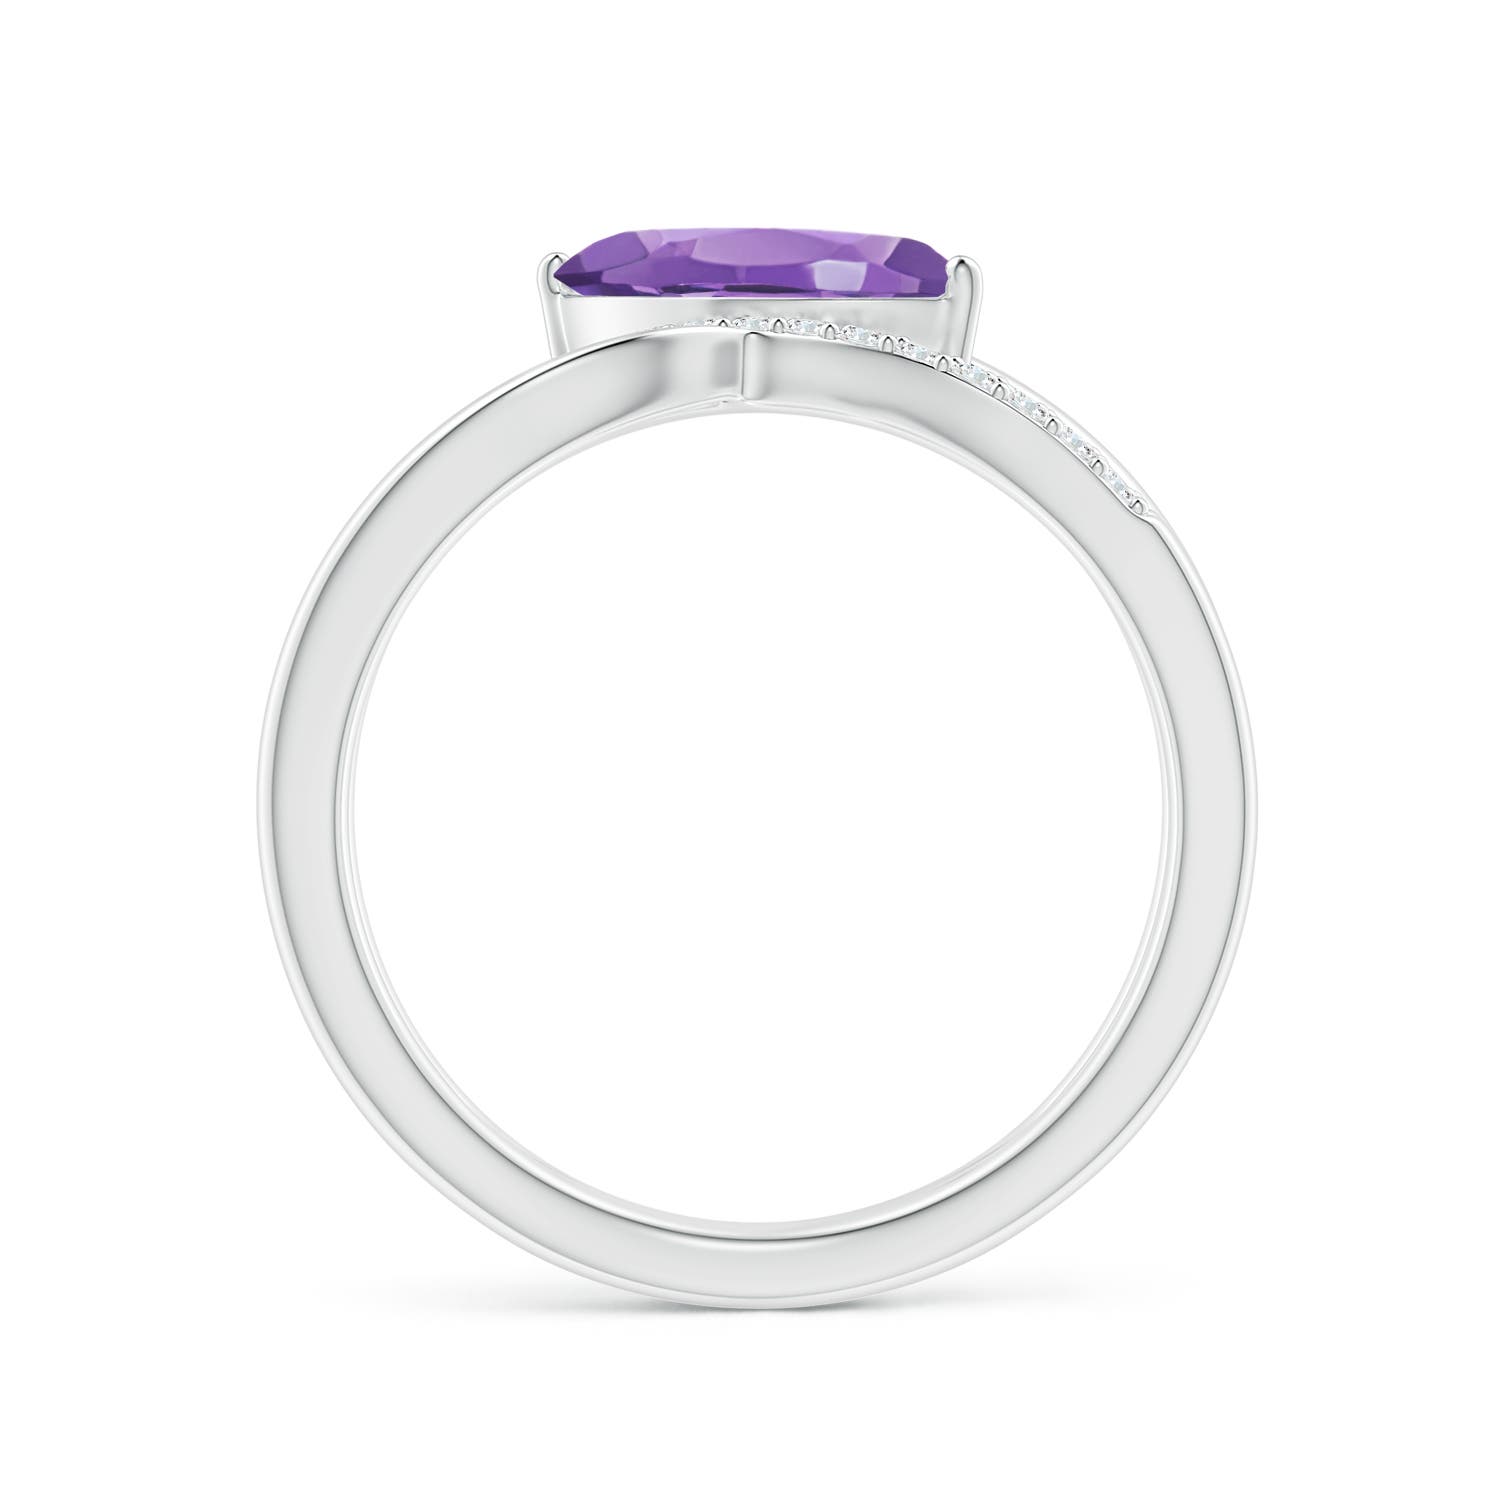 AA - Amethyst / 1.13 CT / 14 KT White Gold